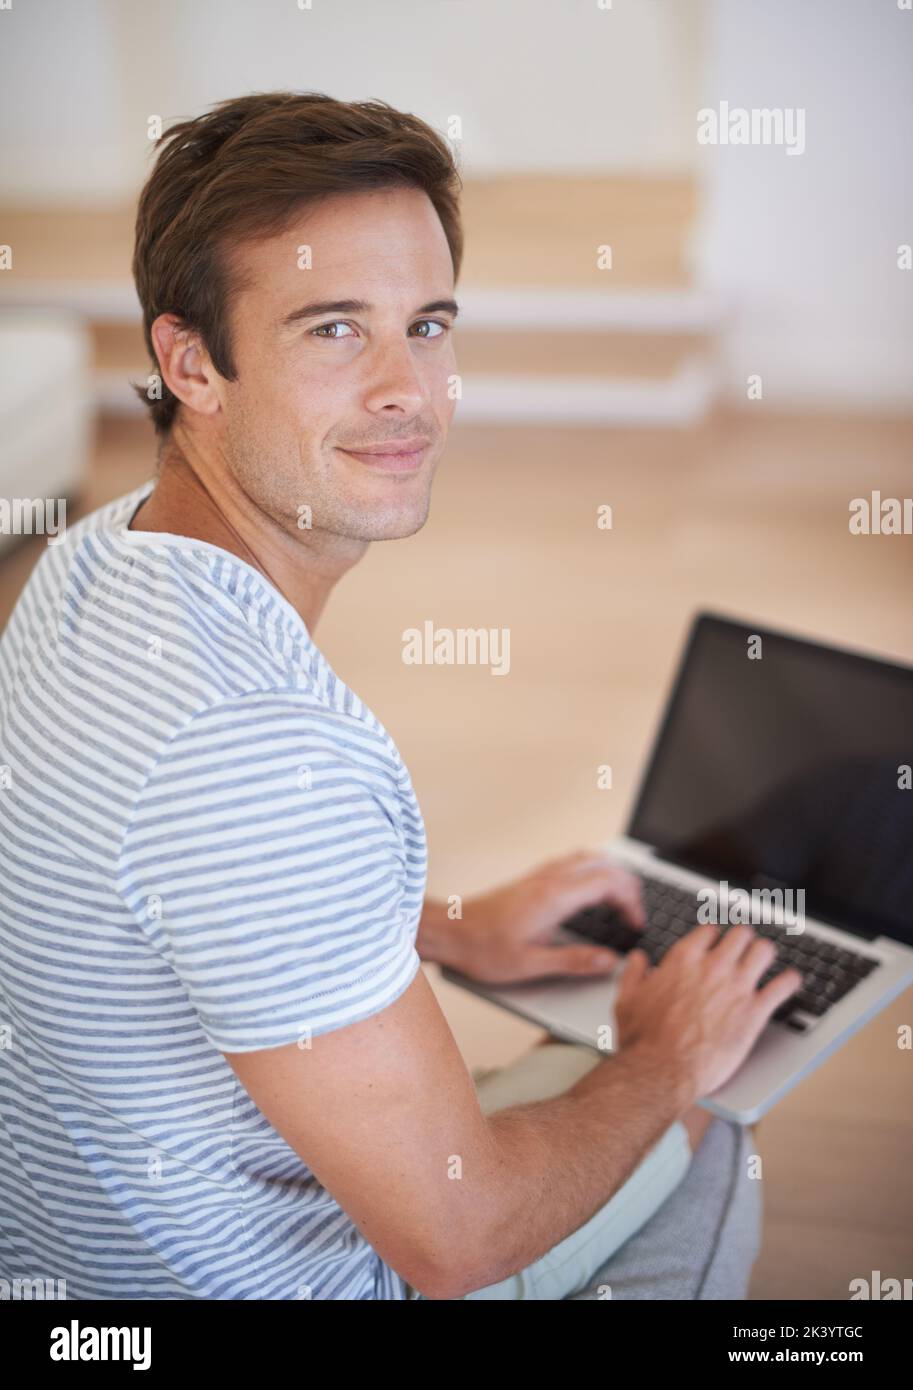 Happy with his internet package. A young man using a laptop and smiling at the camera. Stock Photo